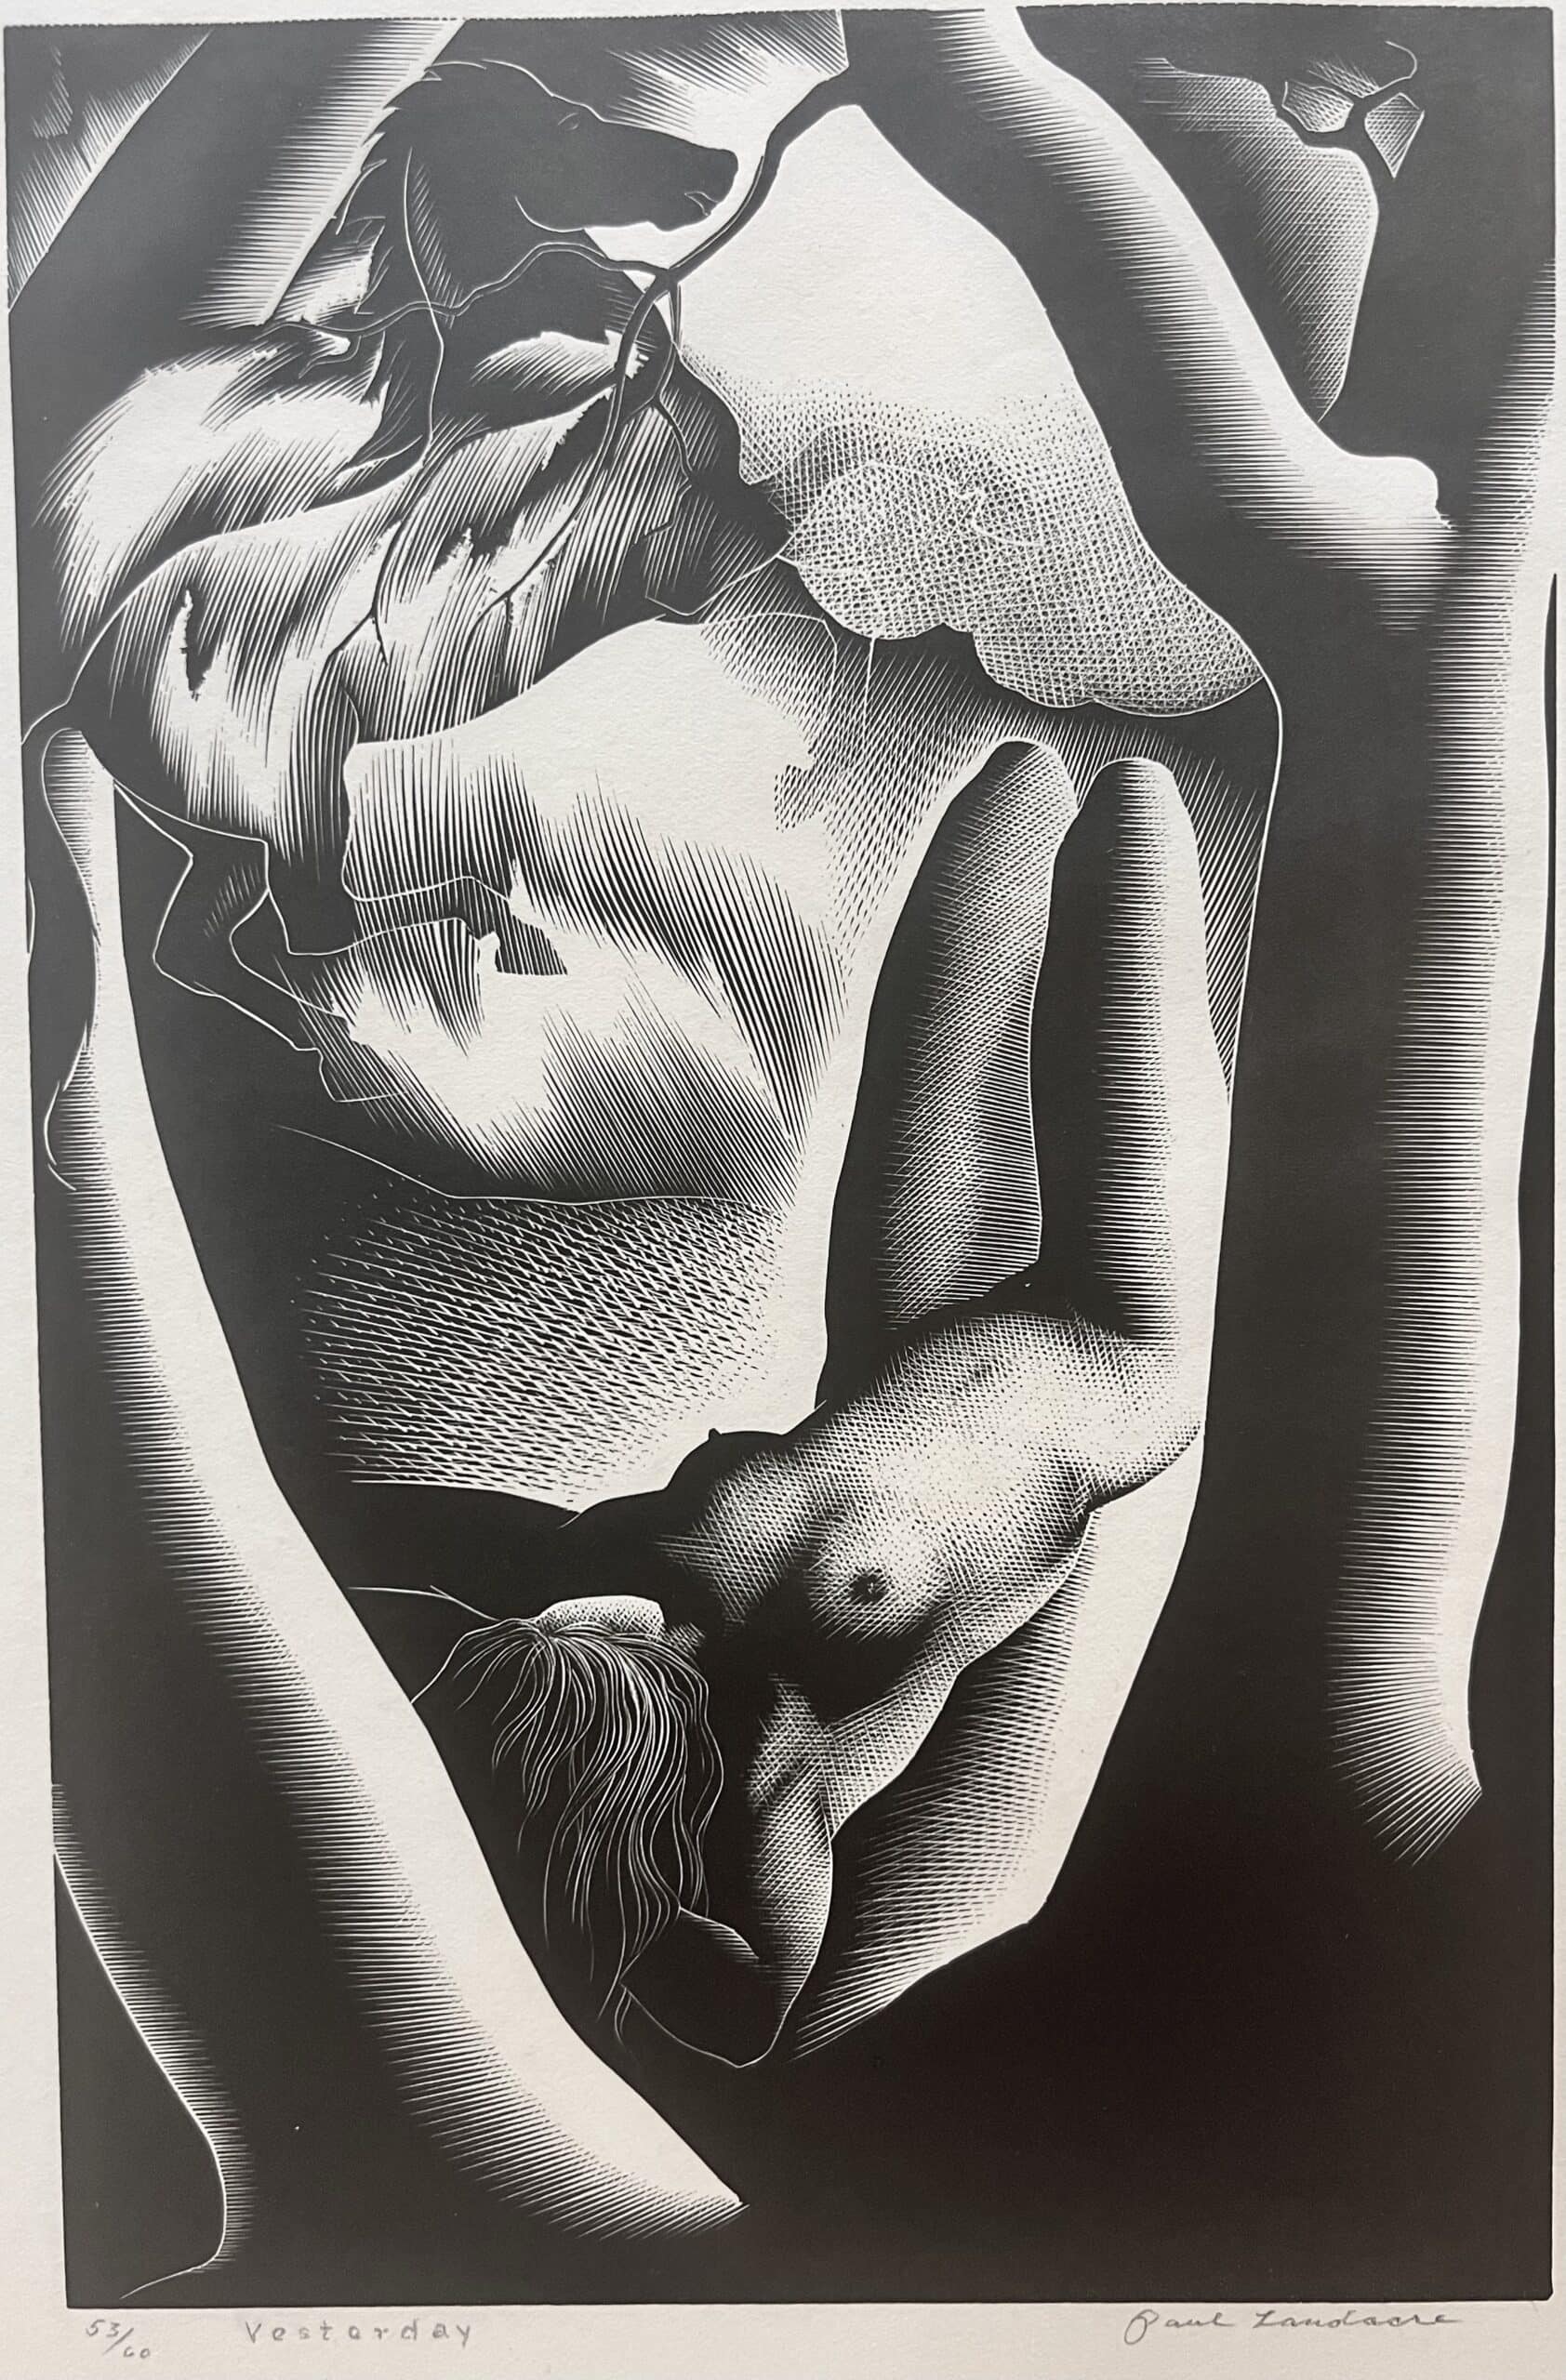 Image of Paul Landacre's wood engraving titled "Yesterday," which depicts a nude female and a horse.